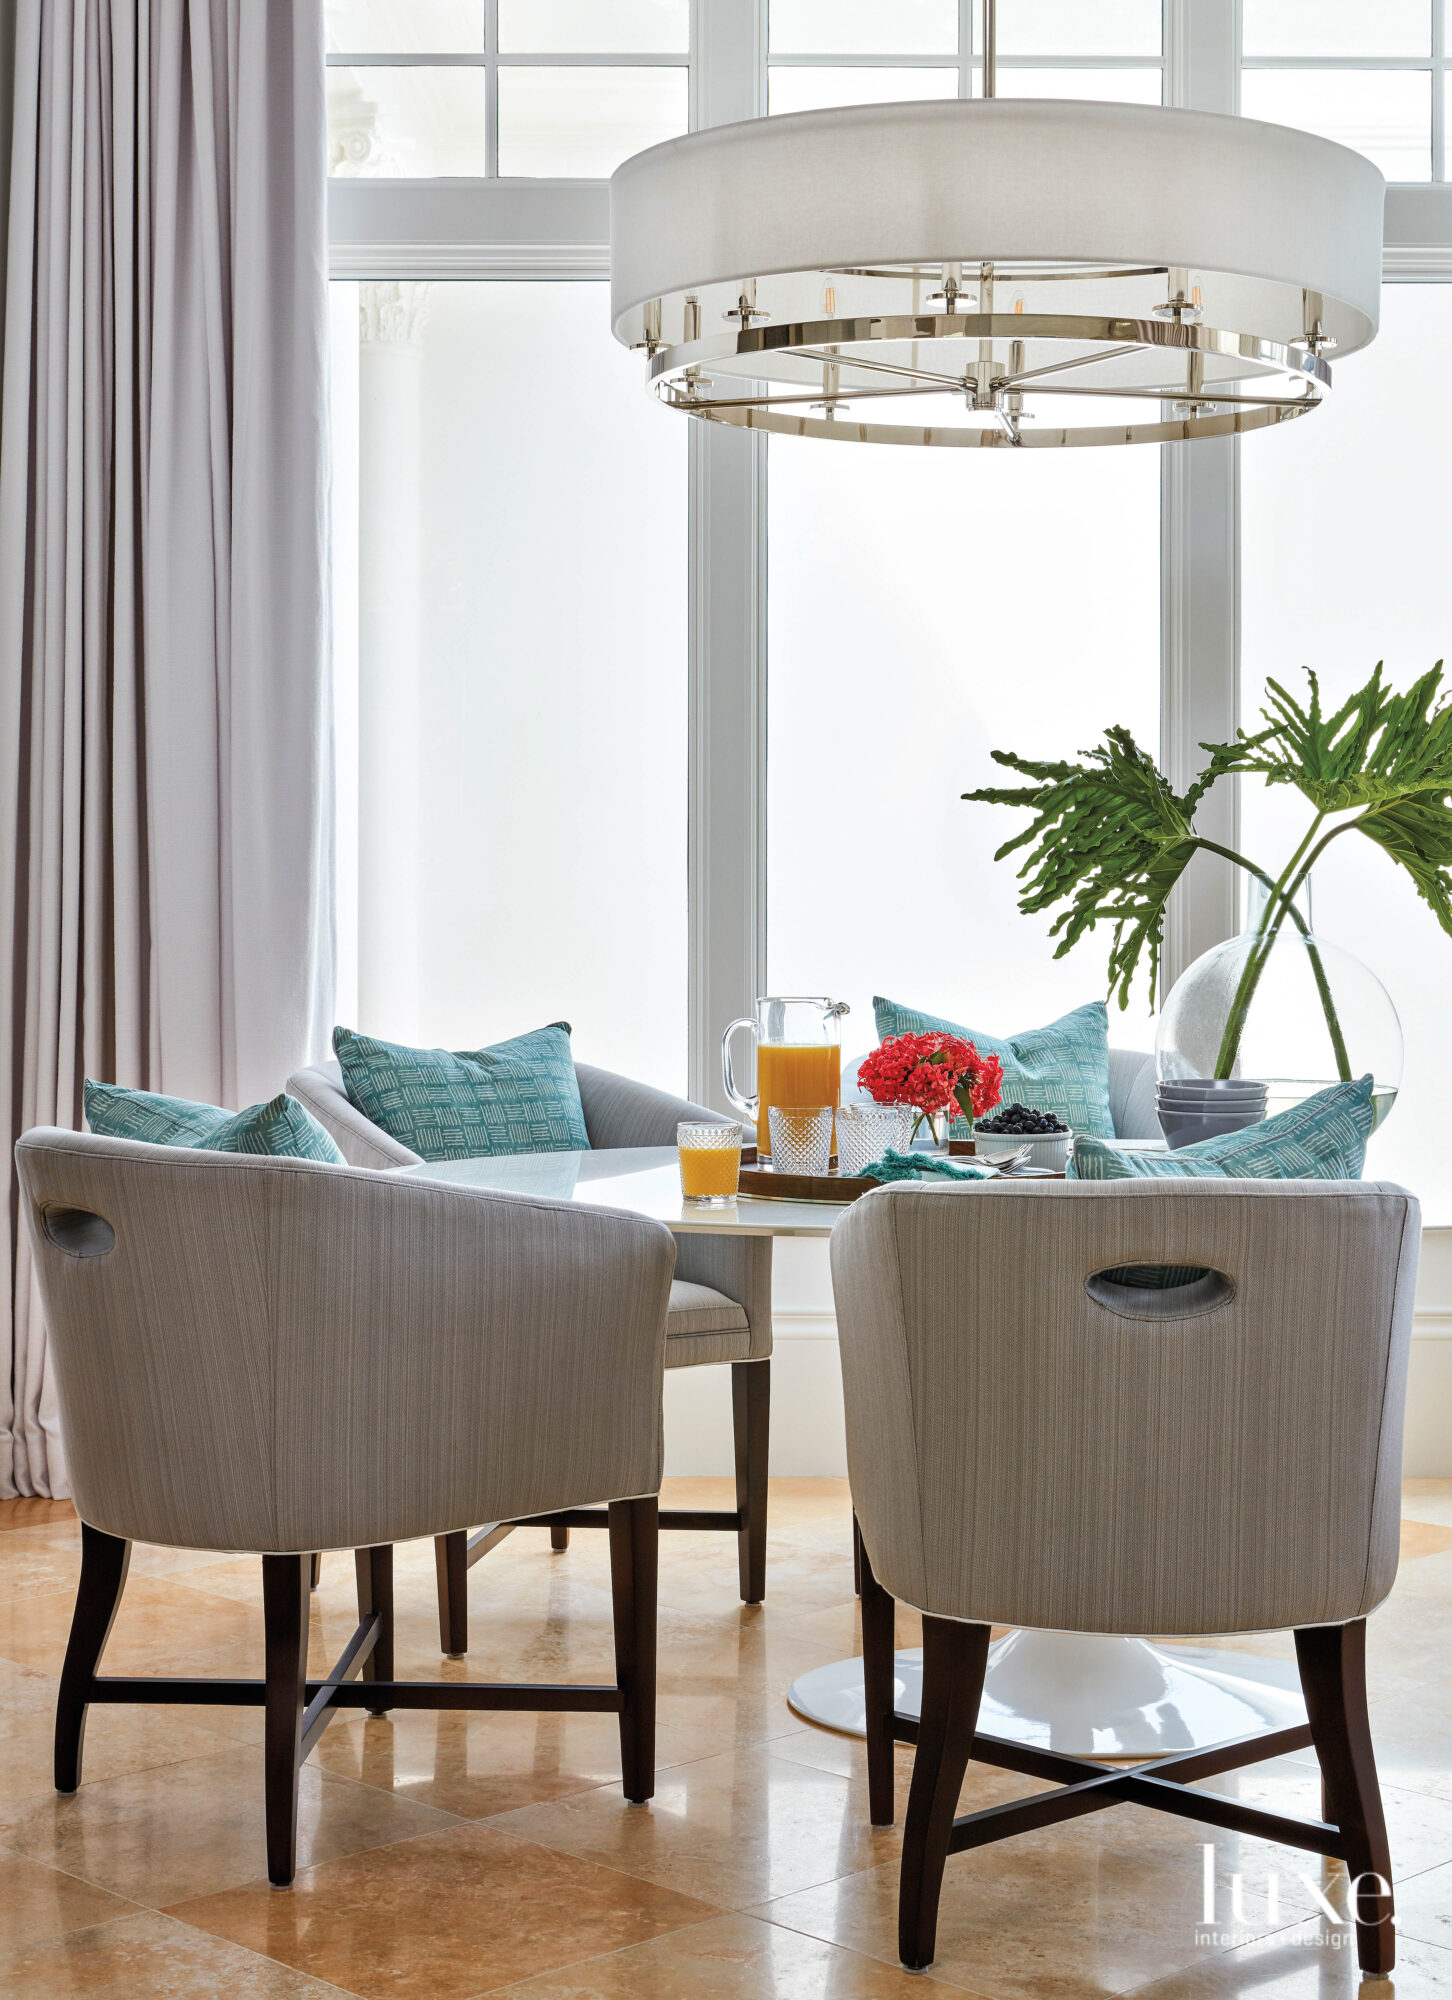 Breakfast room with gray chairs and turquoise pillows.